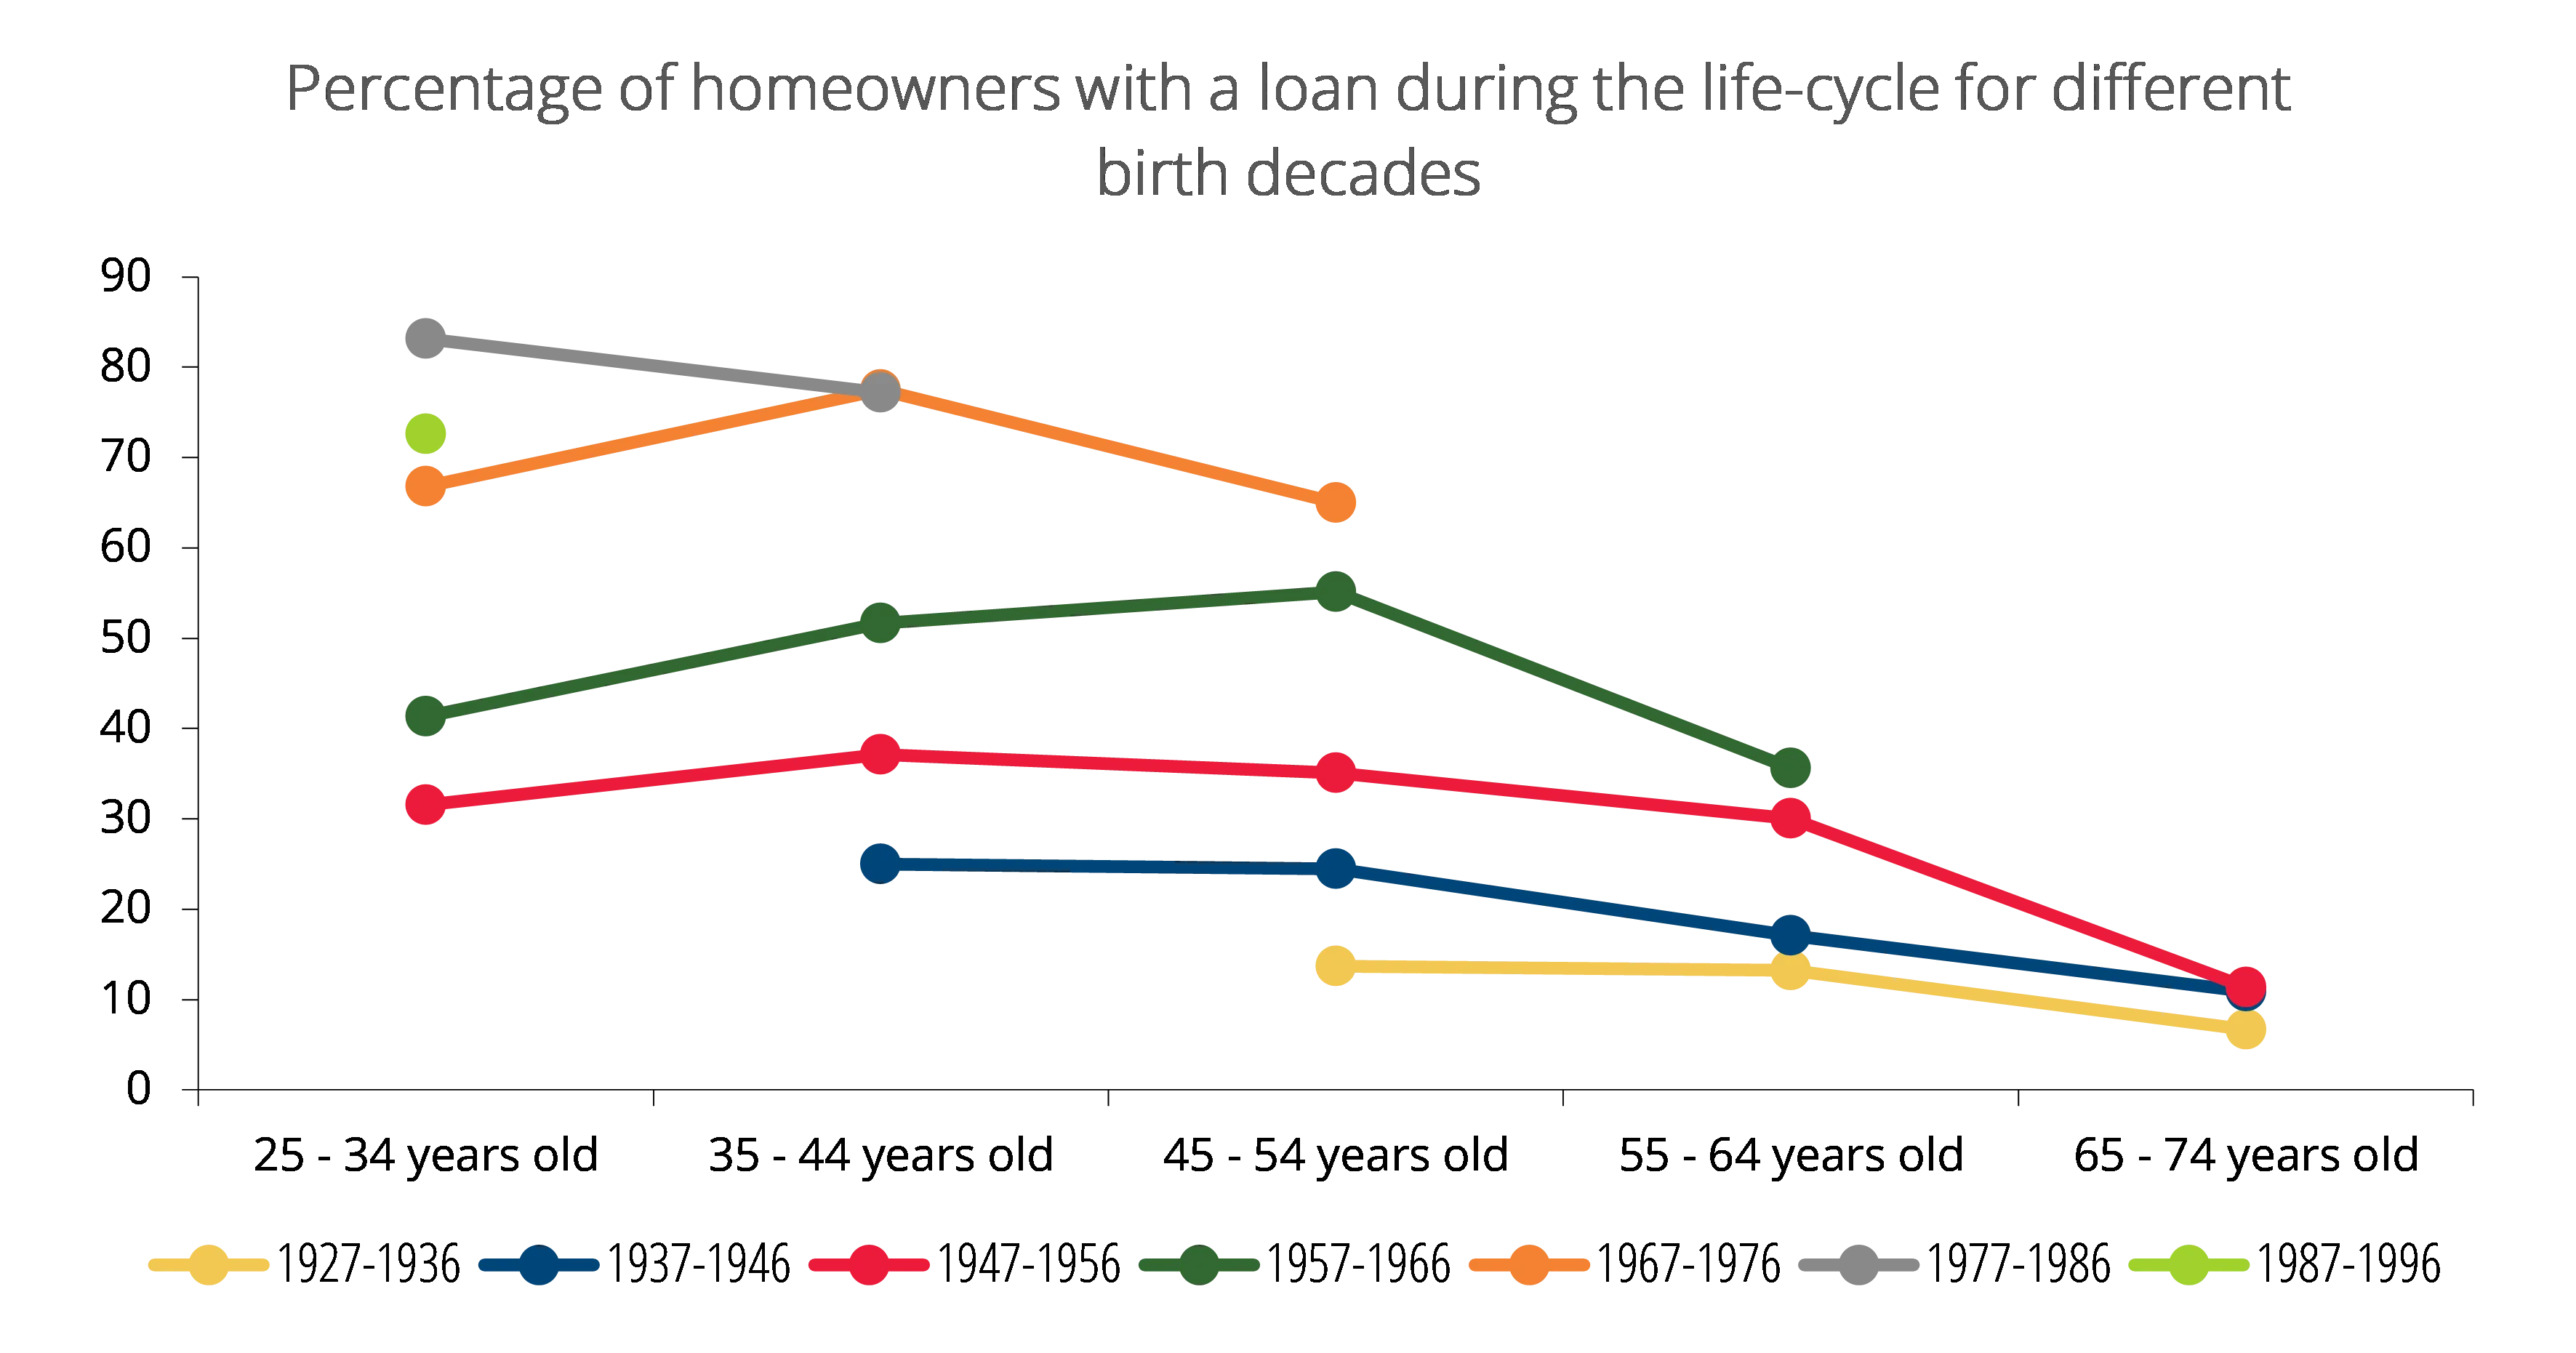 Economics in a picture: The percentage of young homeowners with a housing loan is higher in recent generations